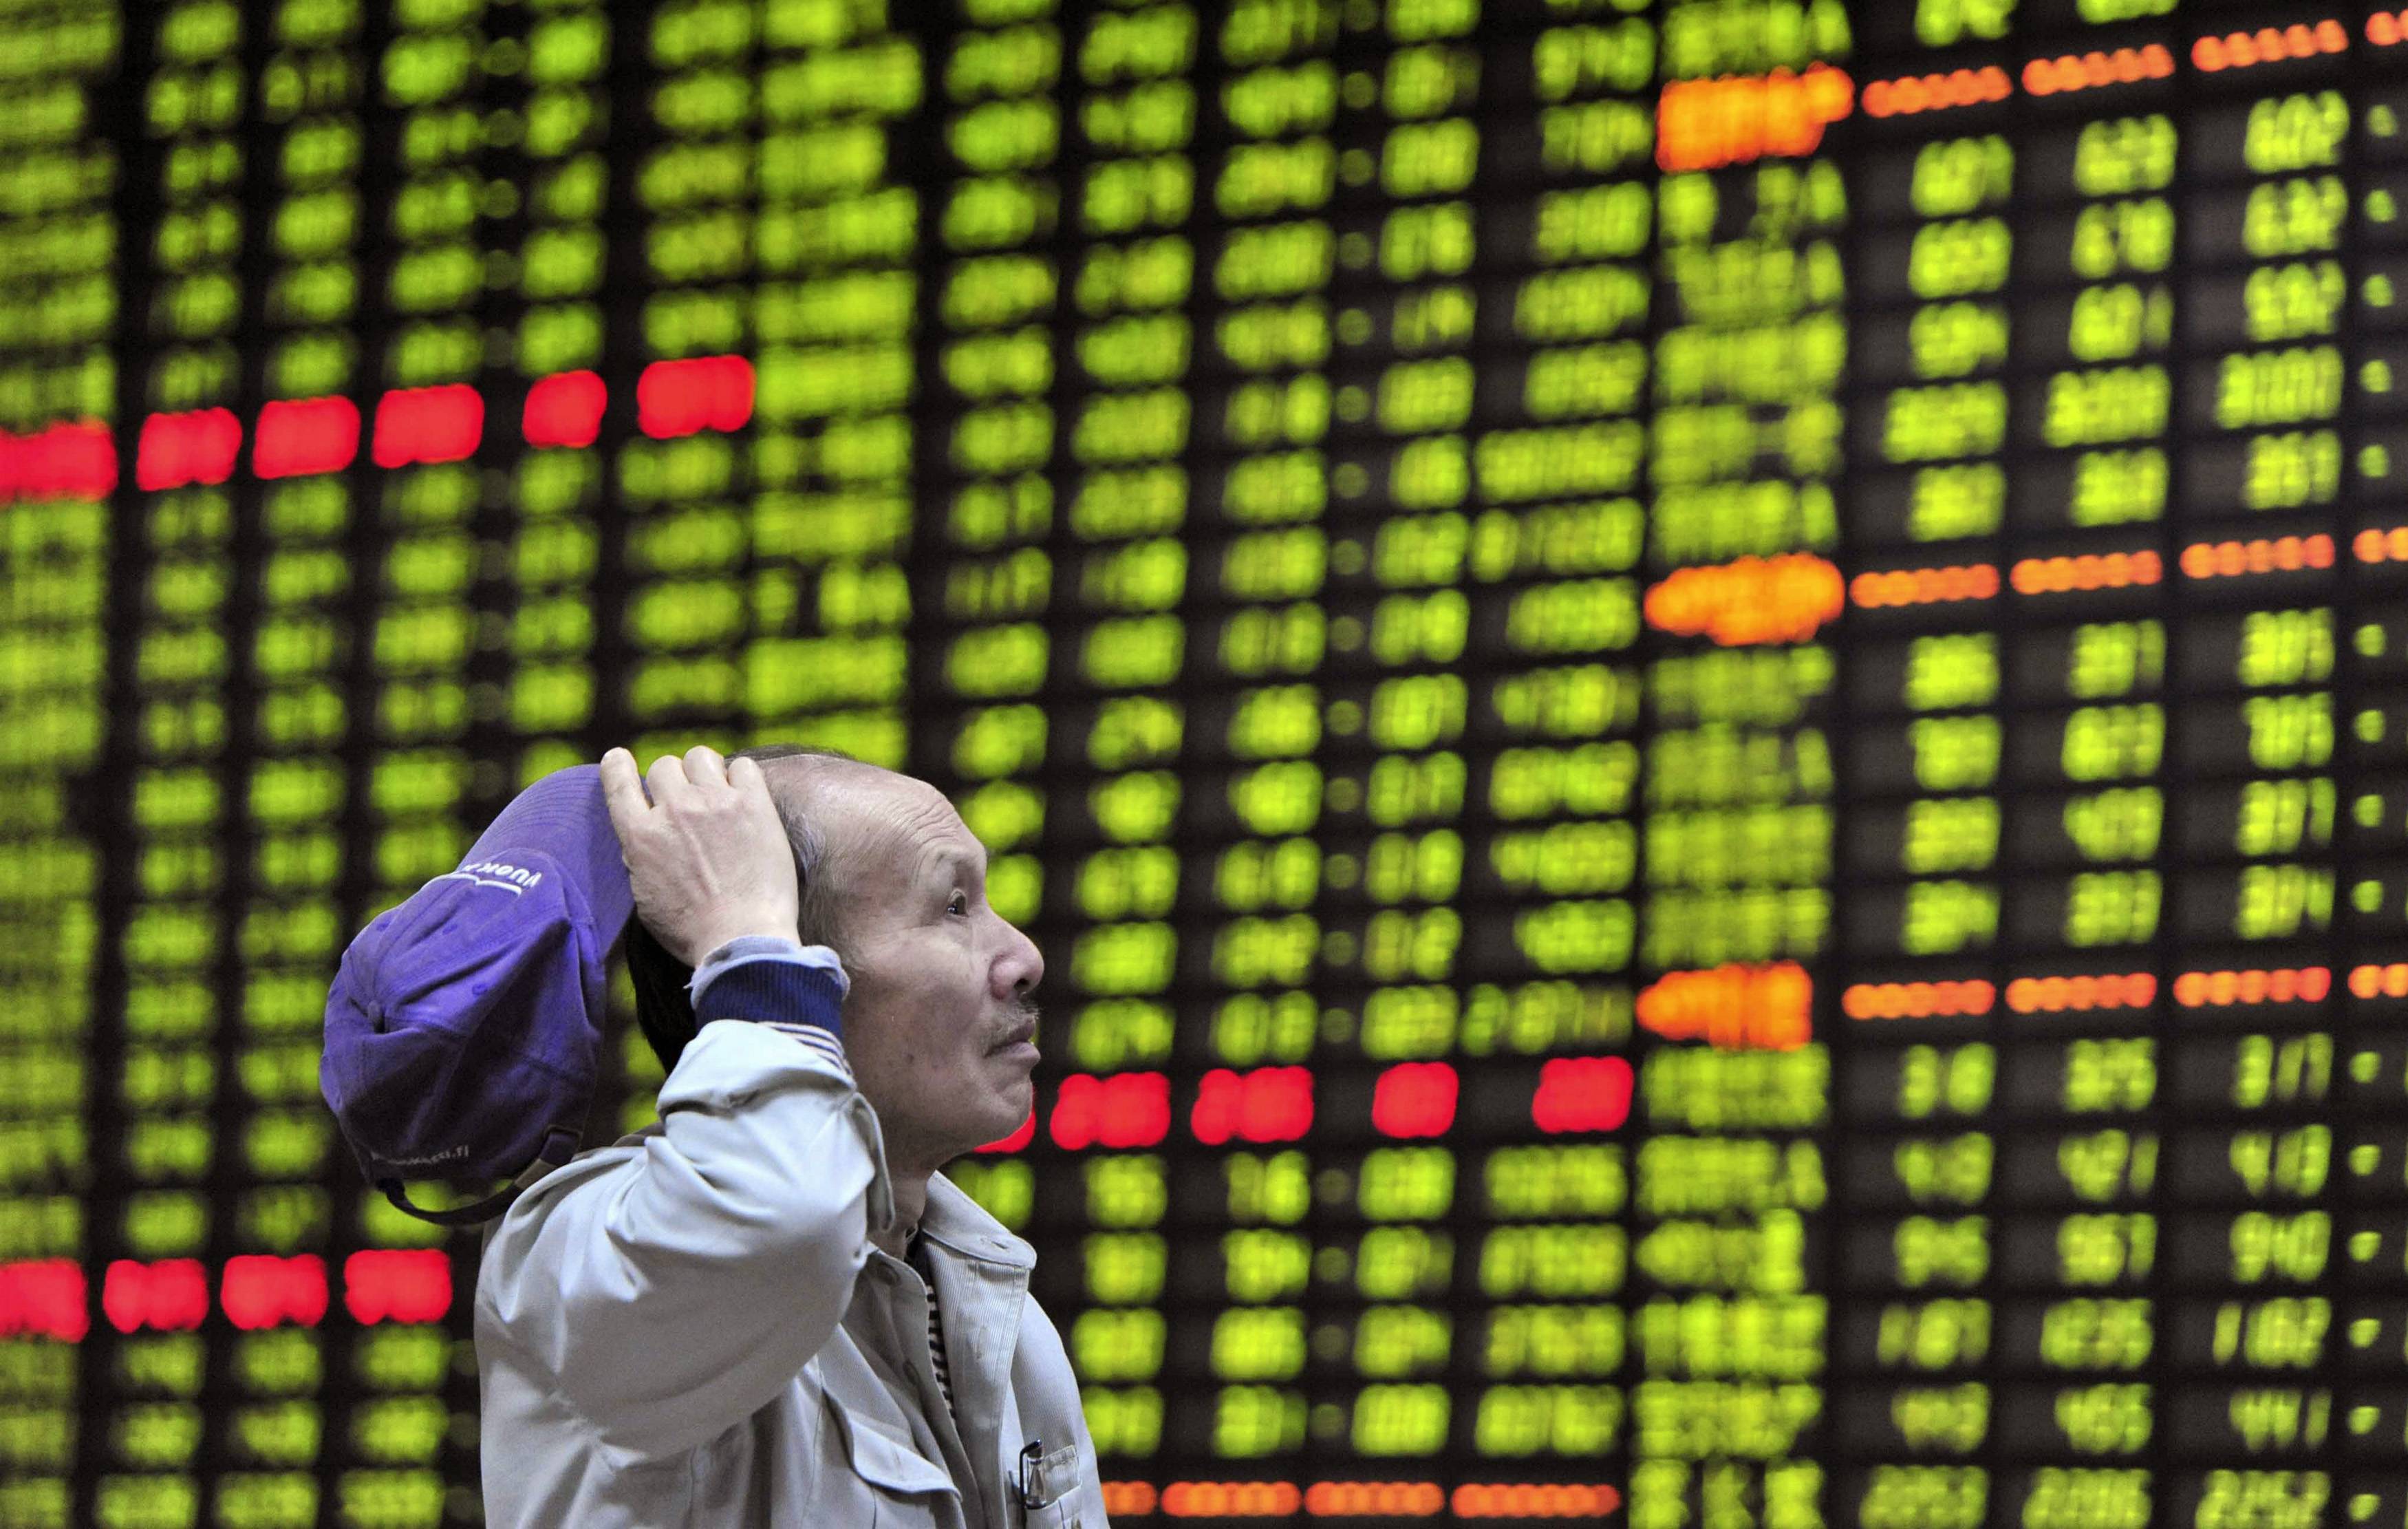 An investor looks at an electronic board showing stock information at a brokerage house in Jiujiang, Jiangxi province April 23, 2013. China shares posted their worst daily loss in nearly a month on Tuesday, weighing on Hong Kong markets, after a weak preliminary survey of Chinese manufacturing activity in April stoked fears of sluggish economic growth in the second quarter. REUTERS/Jon Woo (CHINA - Tags: BUSINESS) CHINA OUT. NO COMMERCIAL OR EDITORIAL SALES IN CHINA